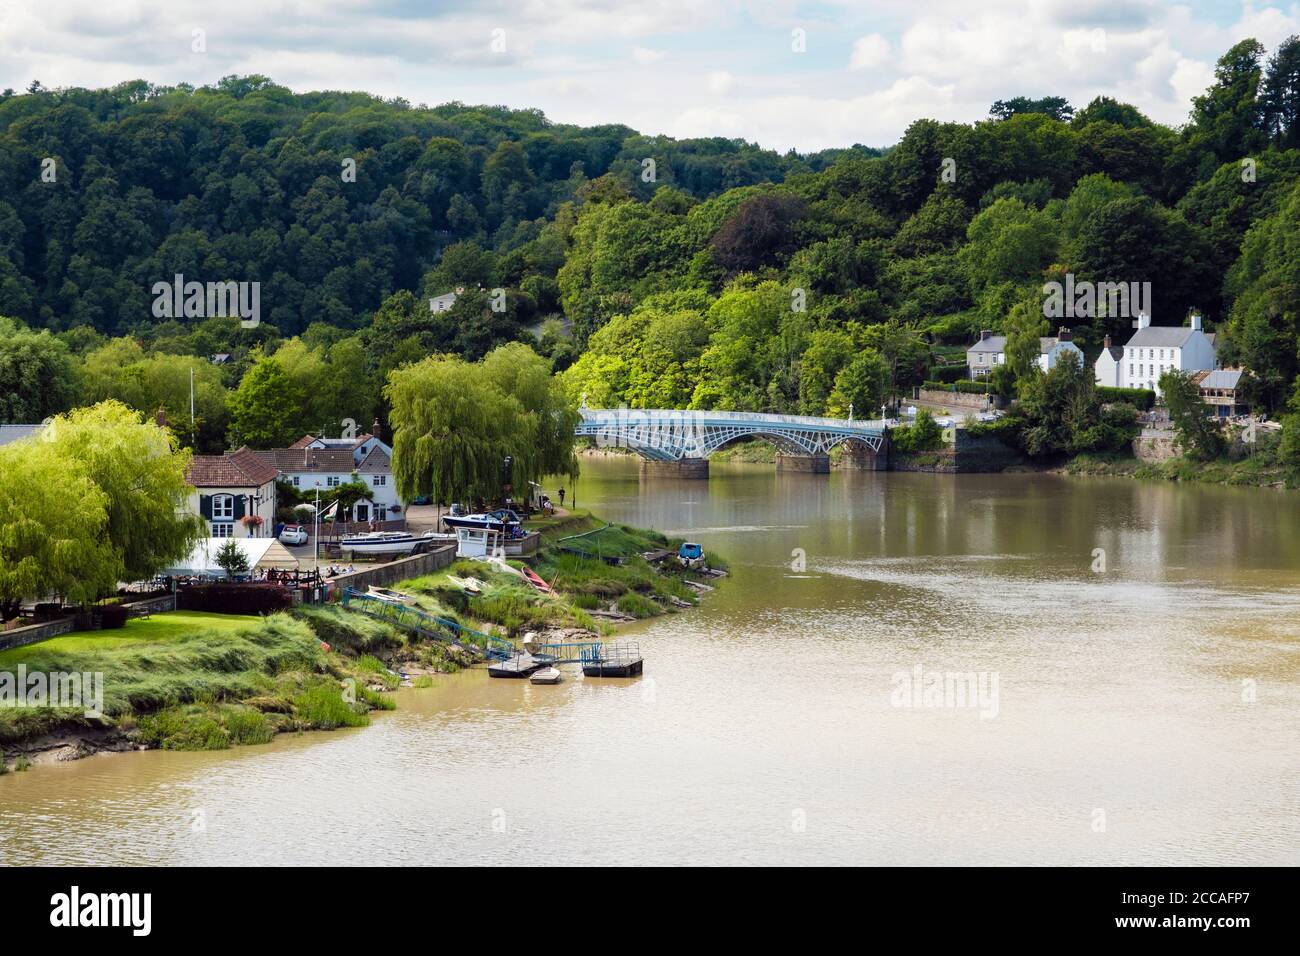 View along River Wye to Riverside Park and Old Wye Bridge on border between English and Welsh nations. Chepstow, Monmouthshire, Wales, UK, Britain Stock Photo